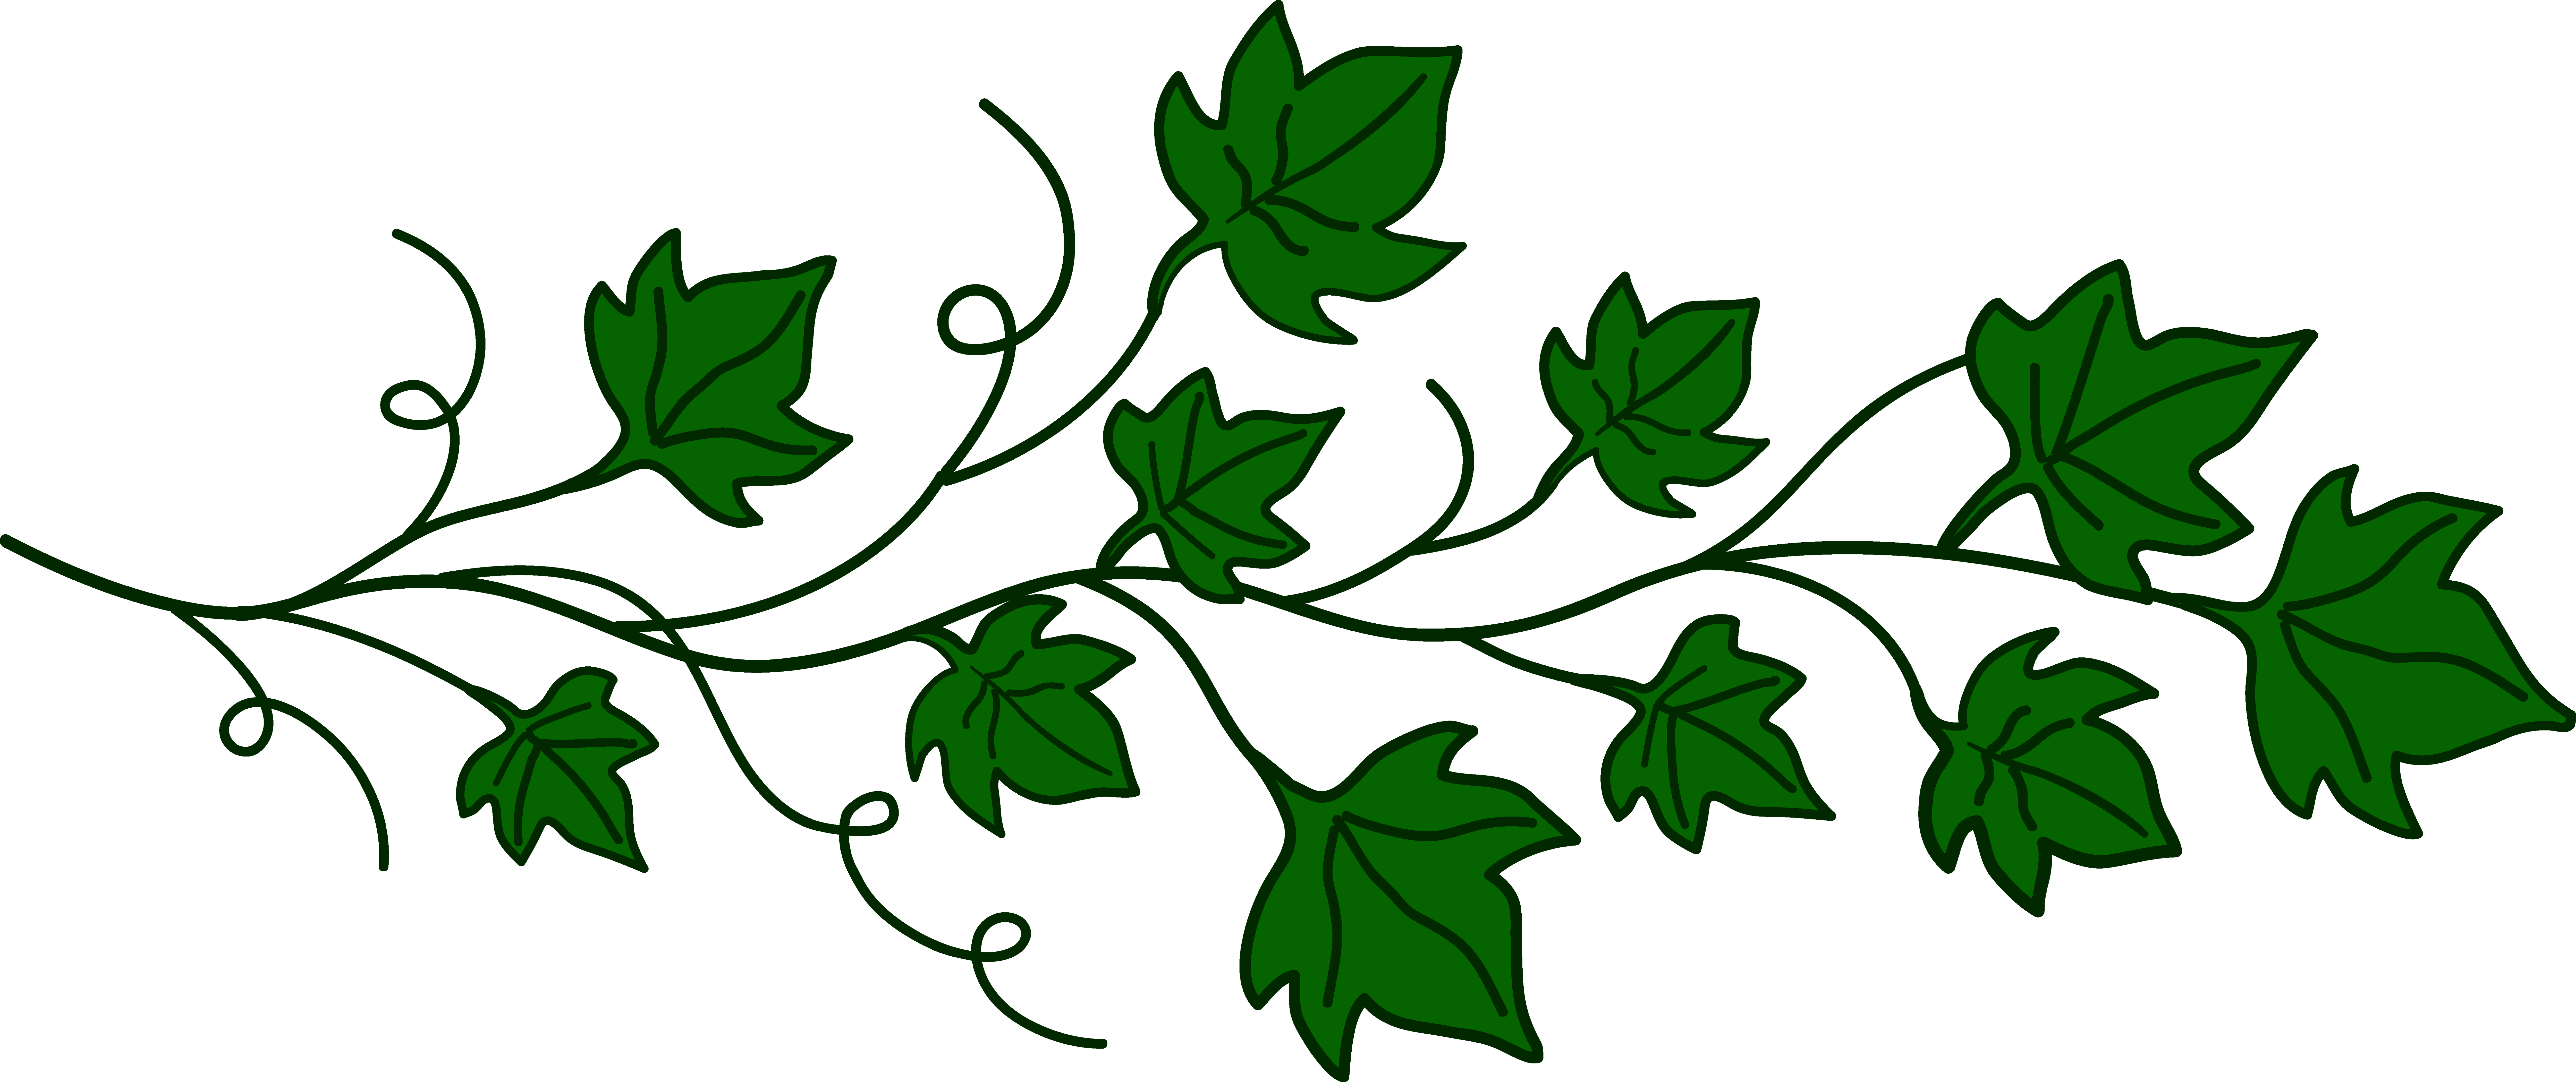 10-ivy-leaf-vector-images-poison-ivy-ivy-leaves-clip-art-and-english